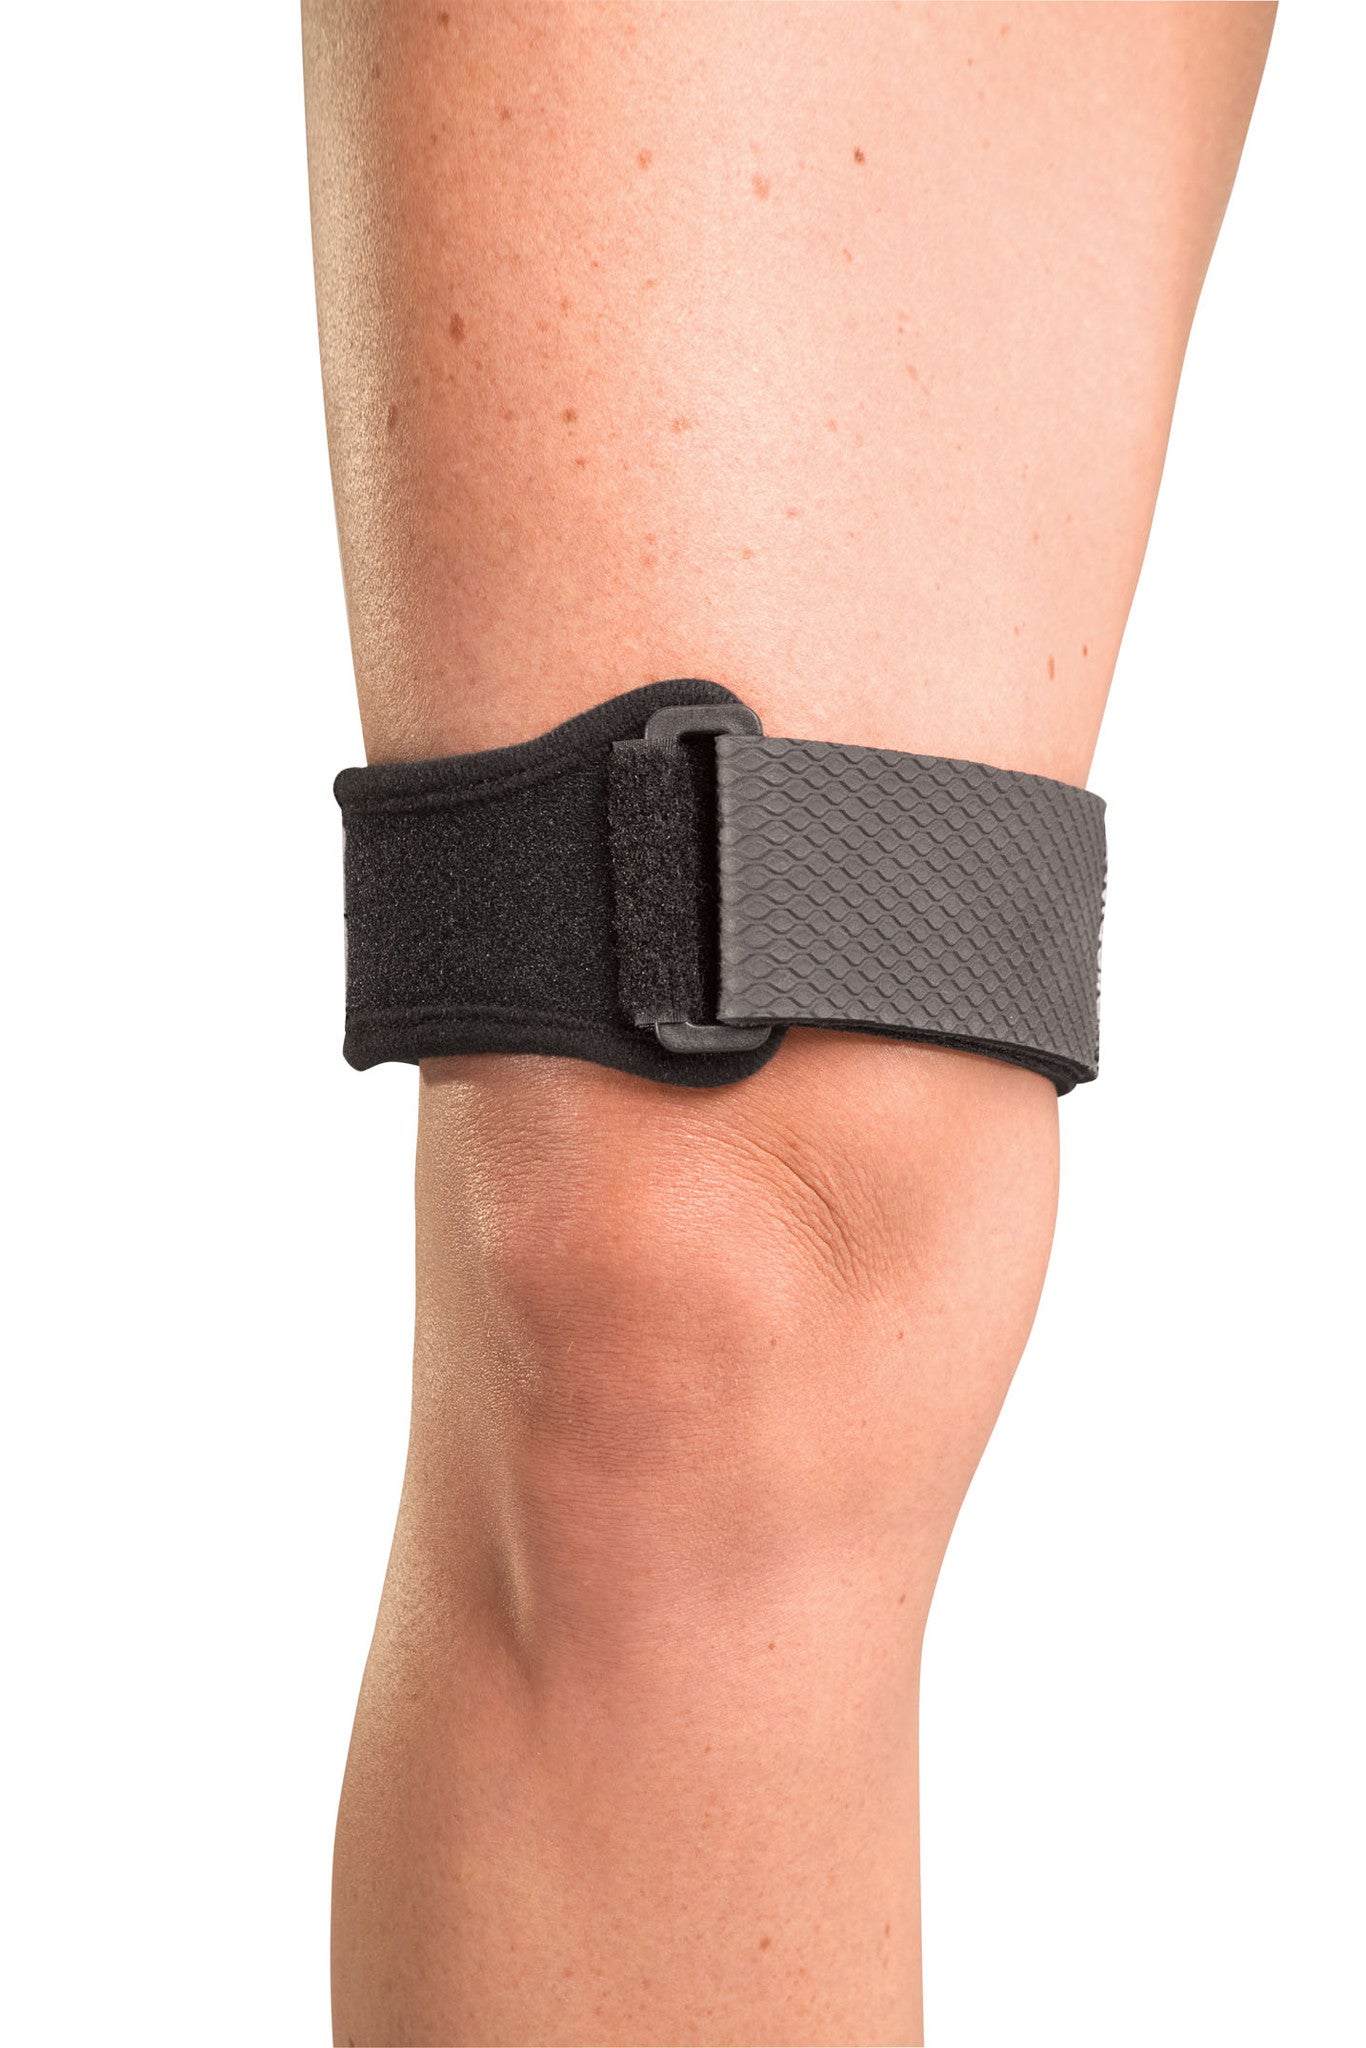 ITB Strap-Mueller® (JUST $21.00) – Prime Medical Supplies